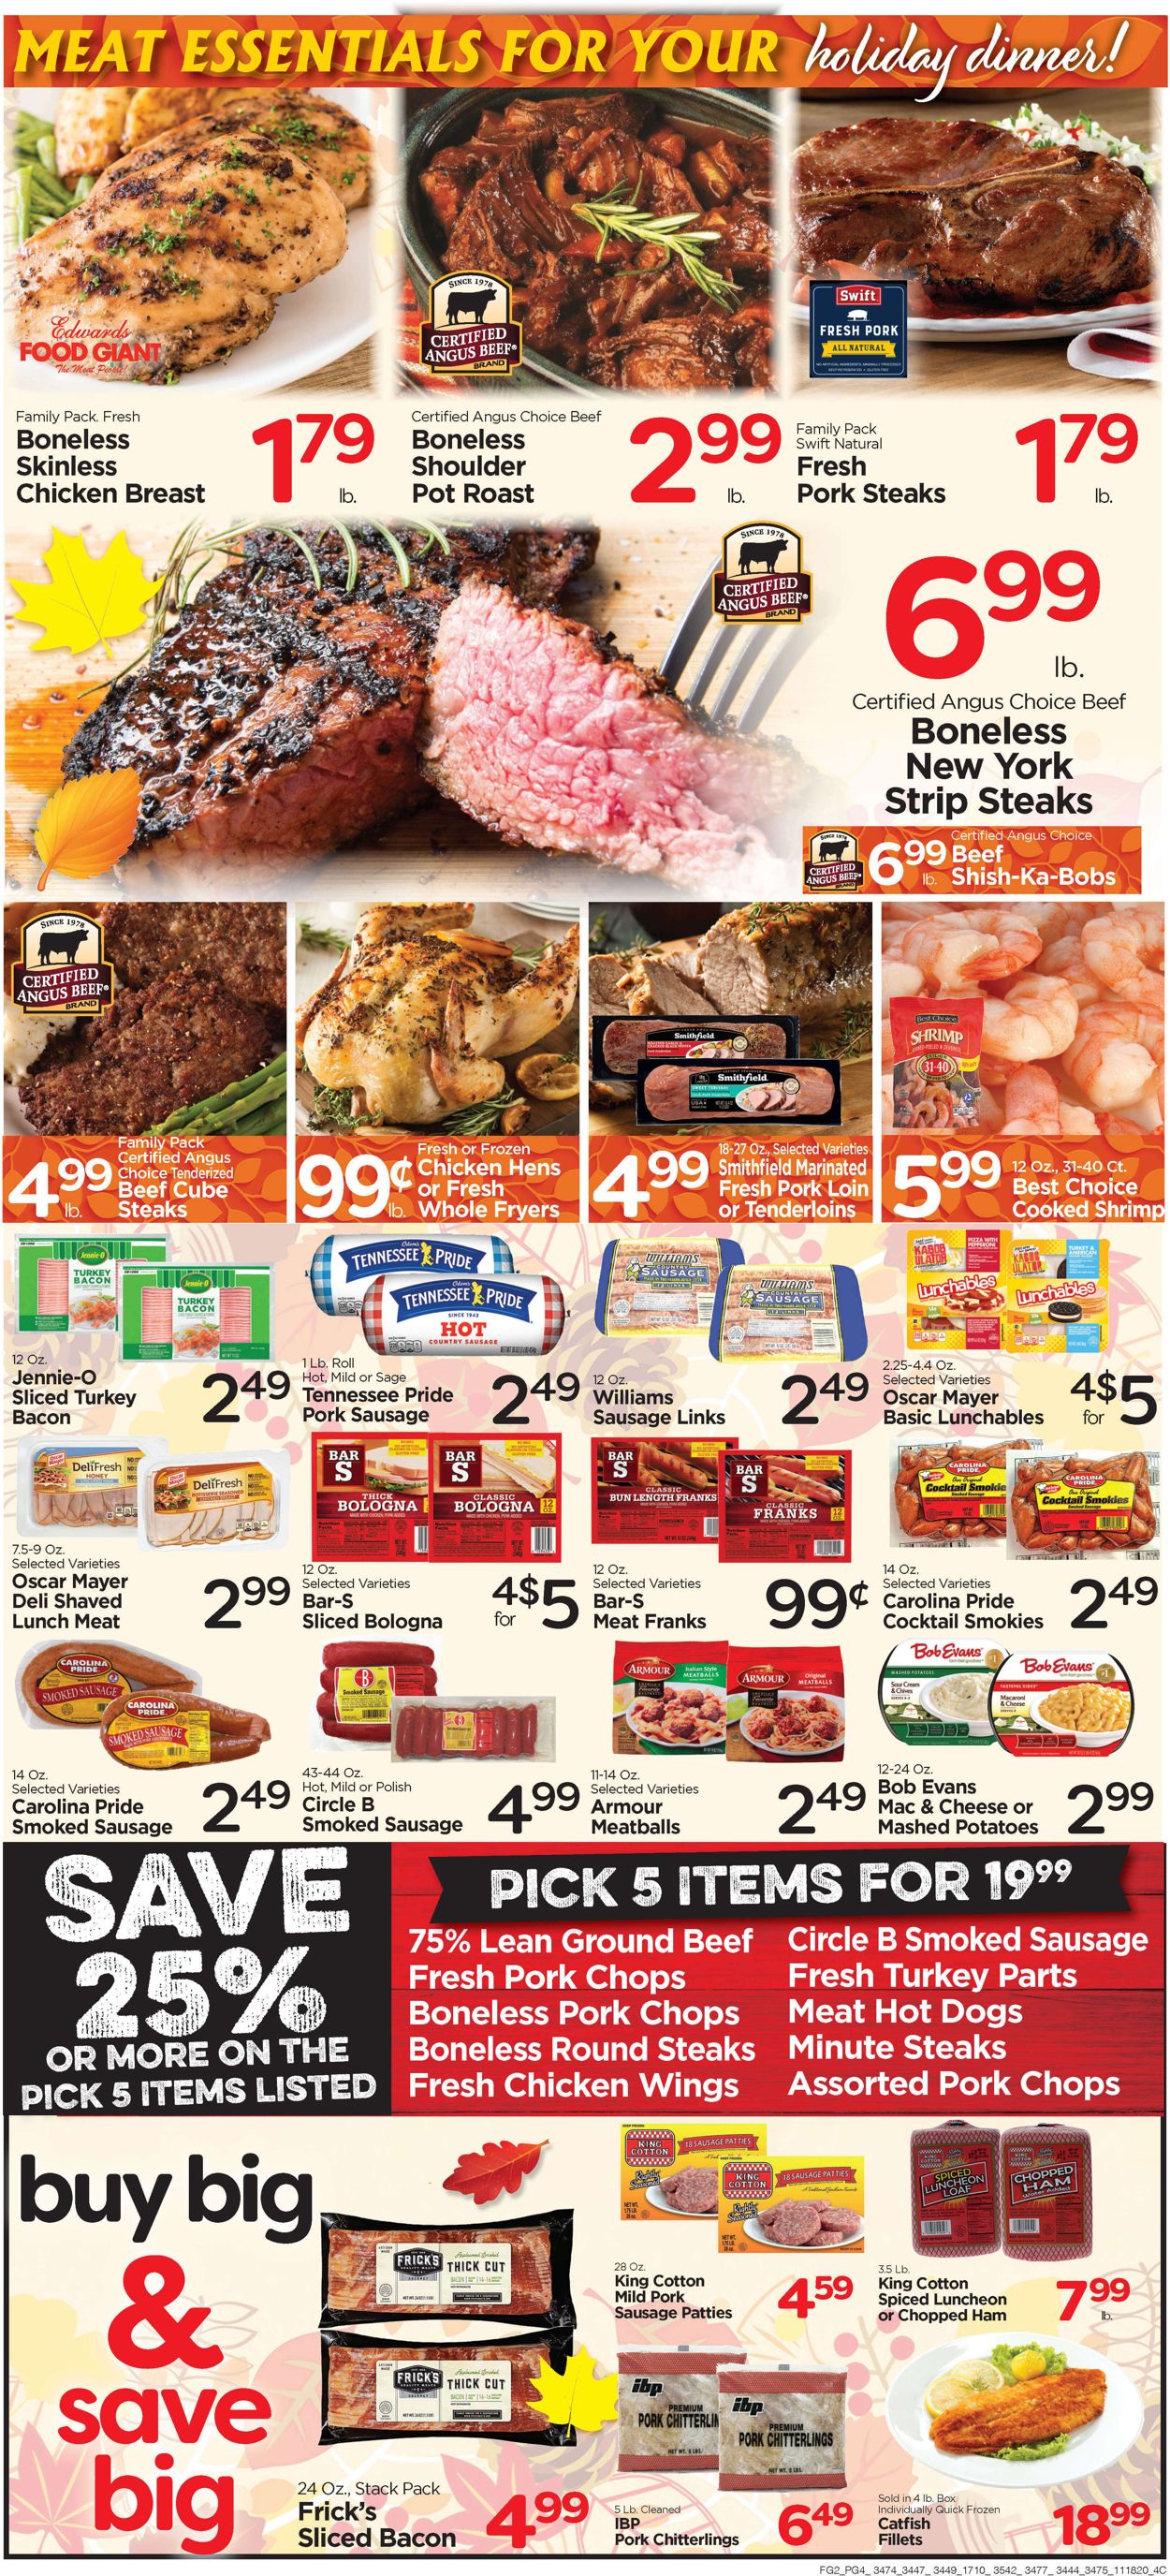 Edwards Food Giant Thanksgiving 2020 Weekly Ad Circular - valid 11/18-11/26/2020 (Page 4)